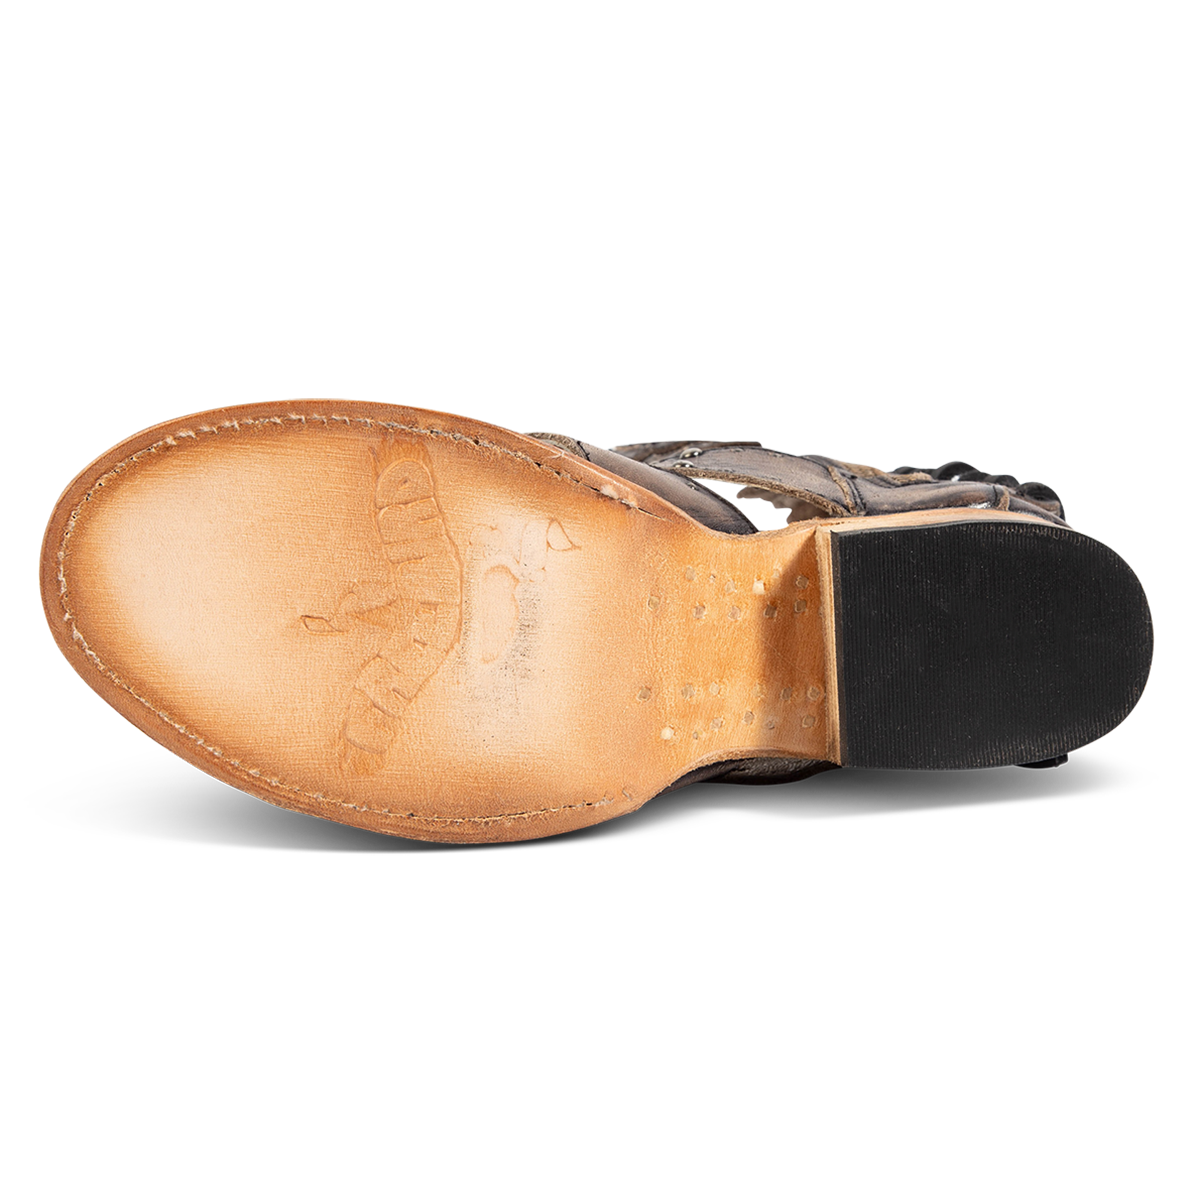 Leather sole imprinted with FREEBIRD on women's Ghost black distressed leather sandal 